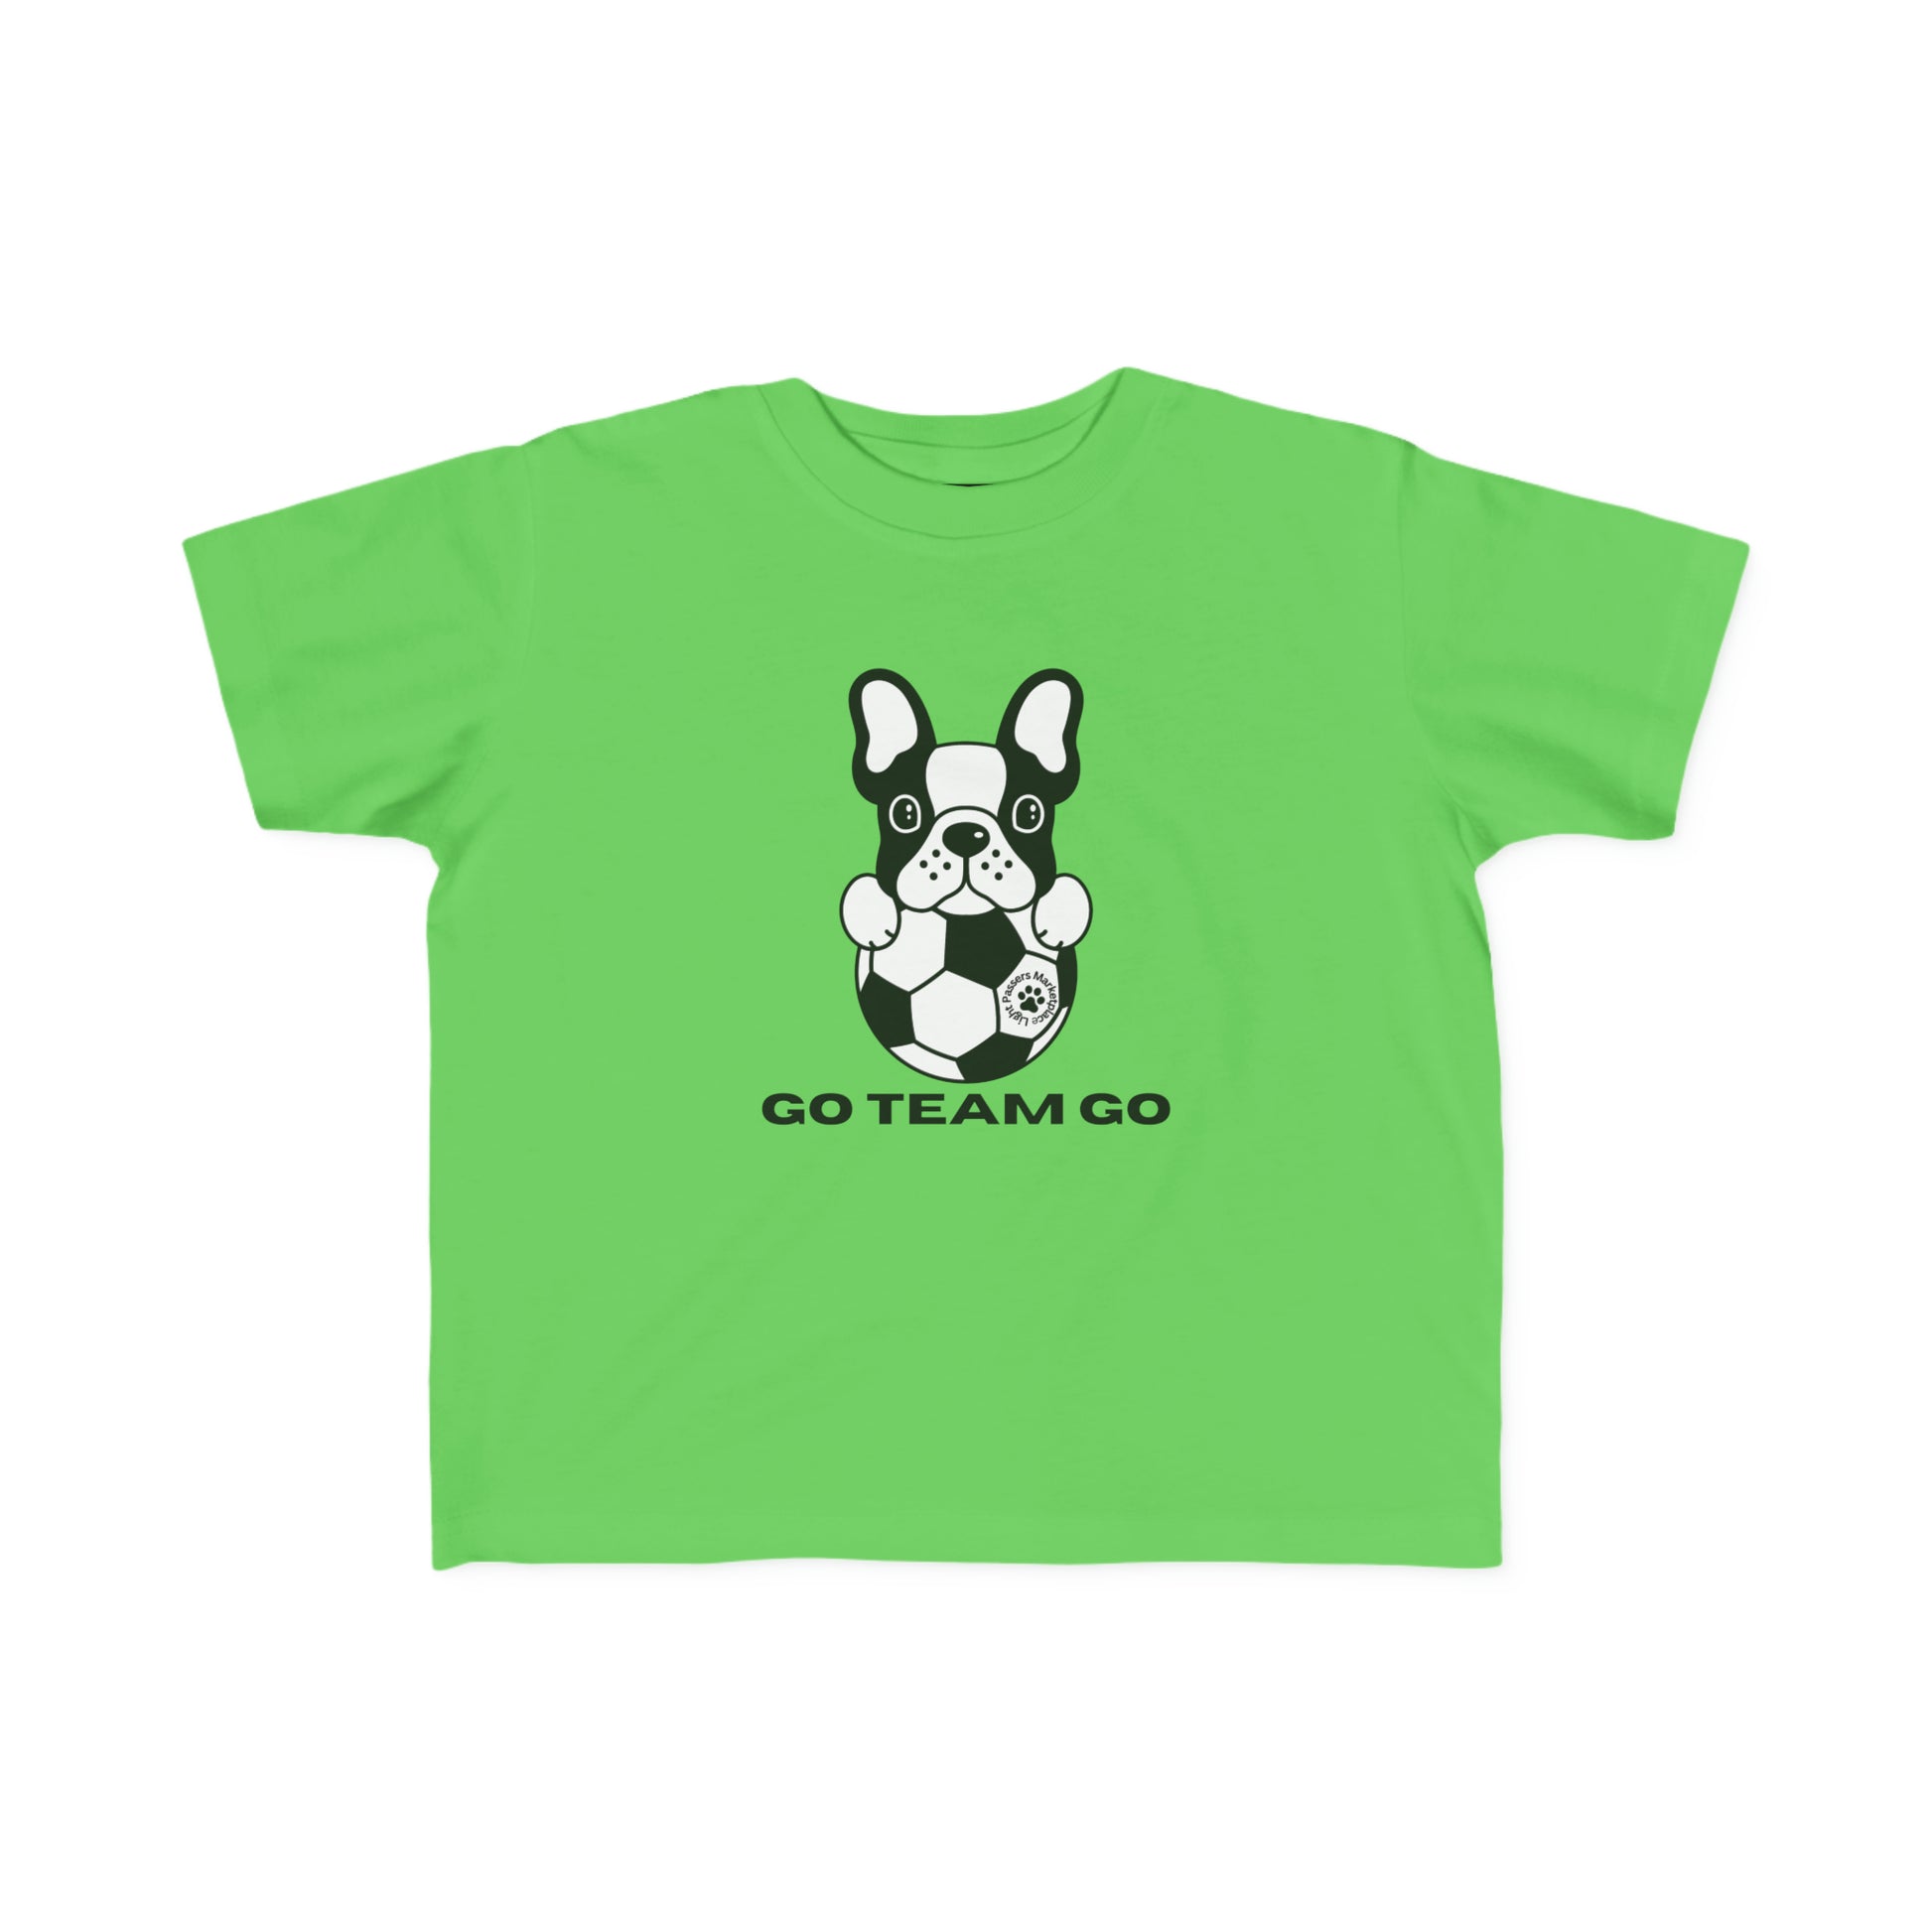 A toddler's Soccer Dog Go Team Go T-shirt featuring a black and white dog with a football. Soft, 100% cotton, durable print, tear-away label, classic fit, 4.5 oz/yd² fabric.